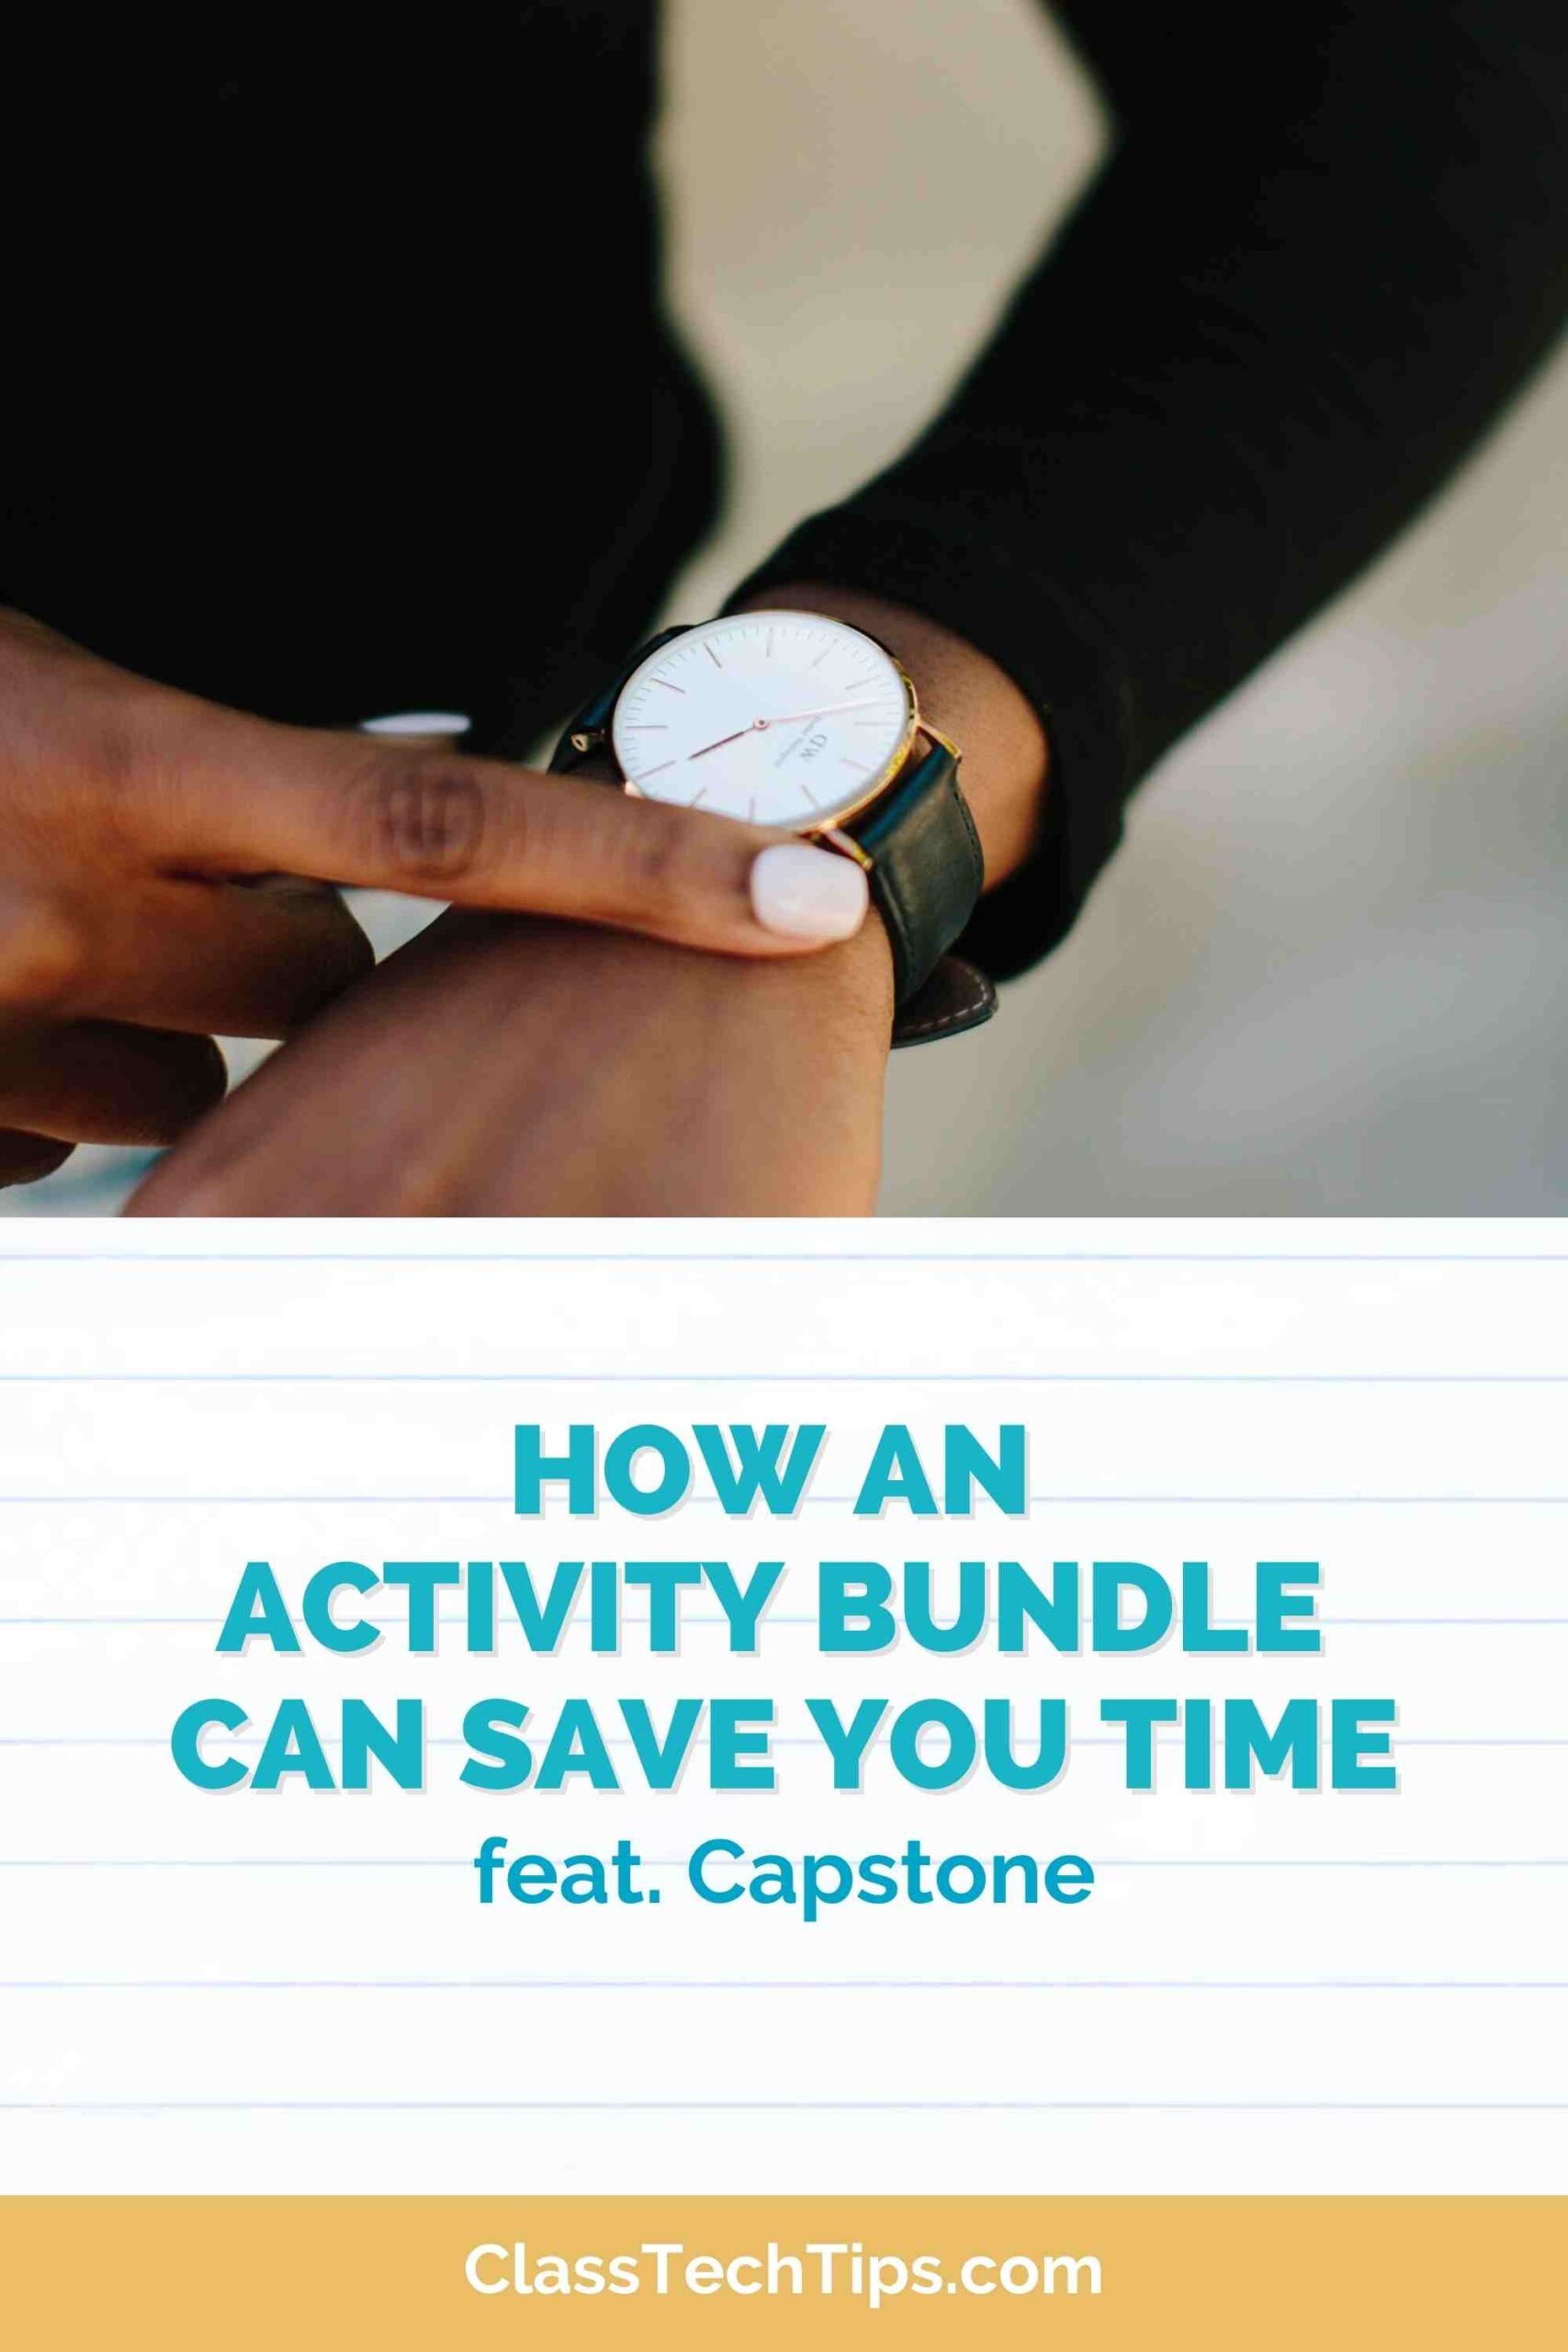 Activity Bundle Can Save You Time